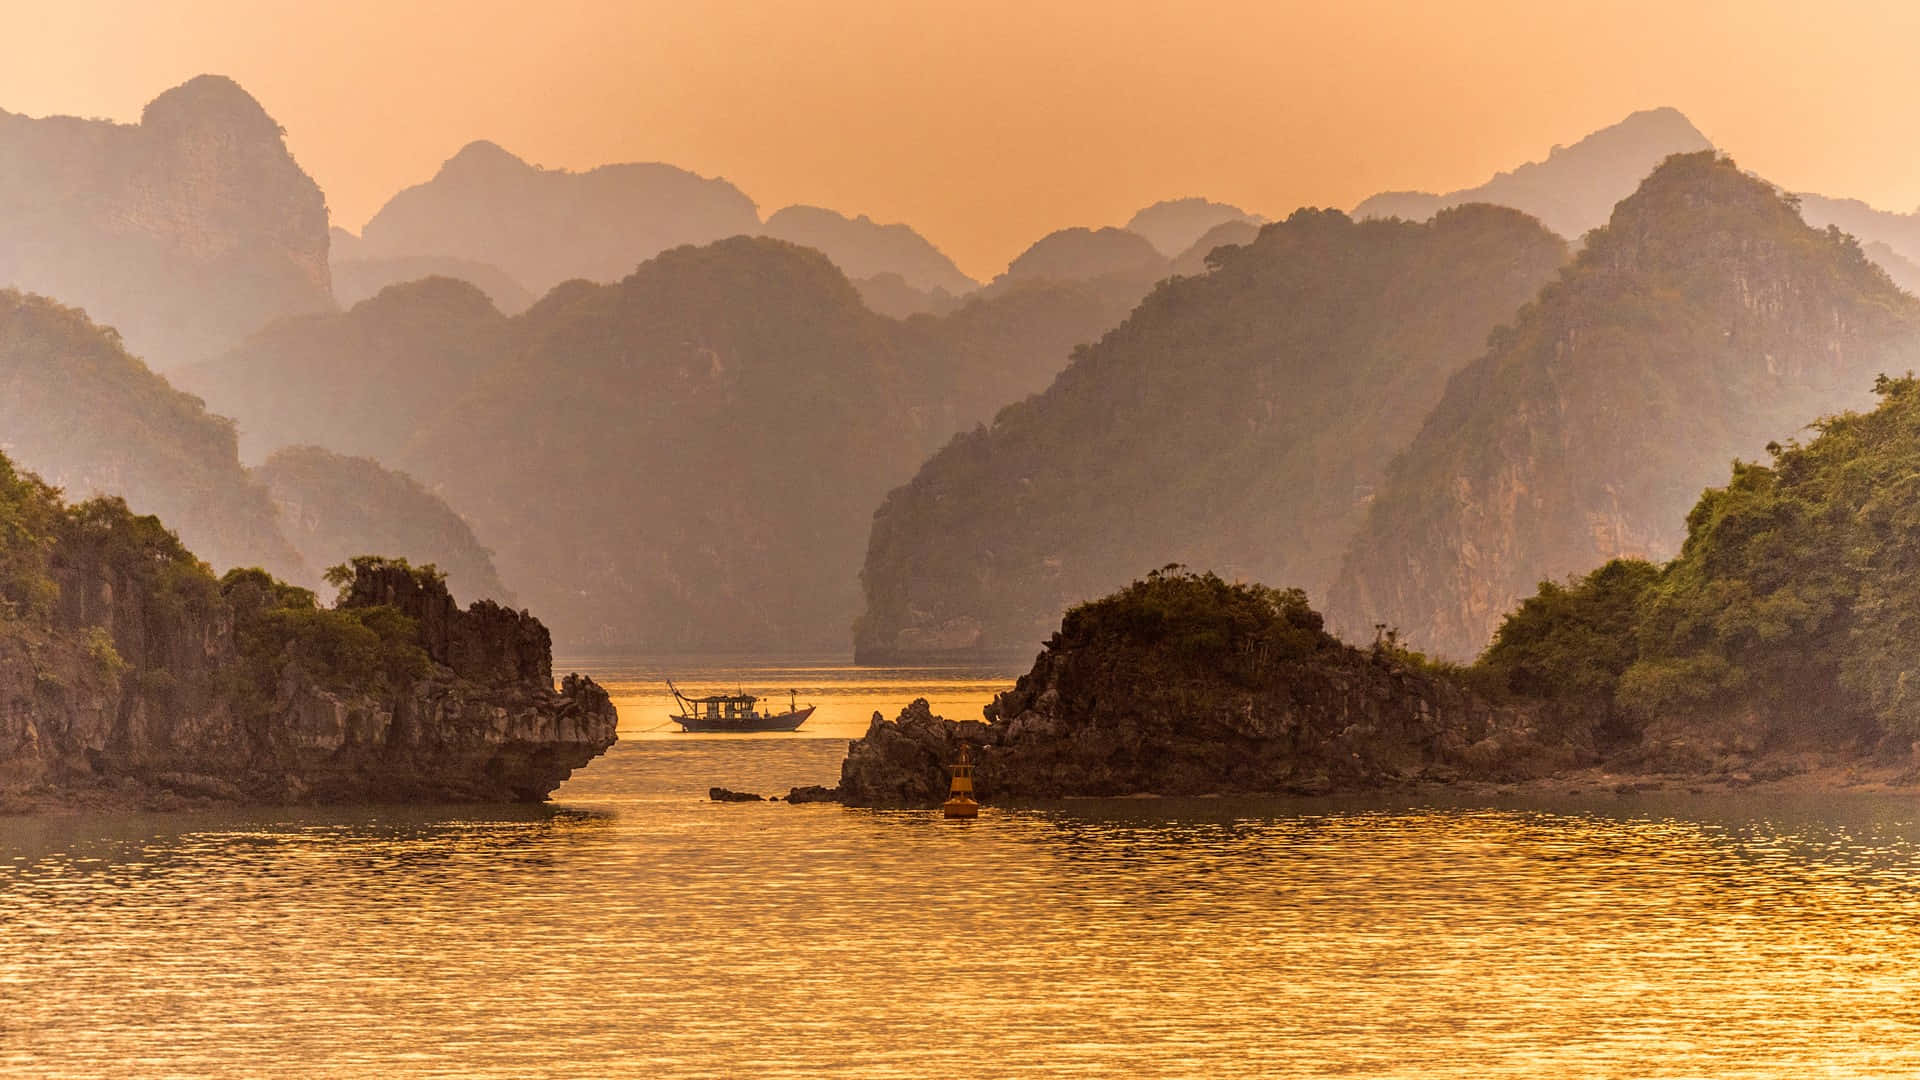 The Sunset Scenery Of Halong Bay Wallpaper